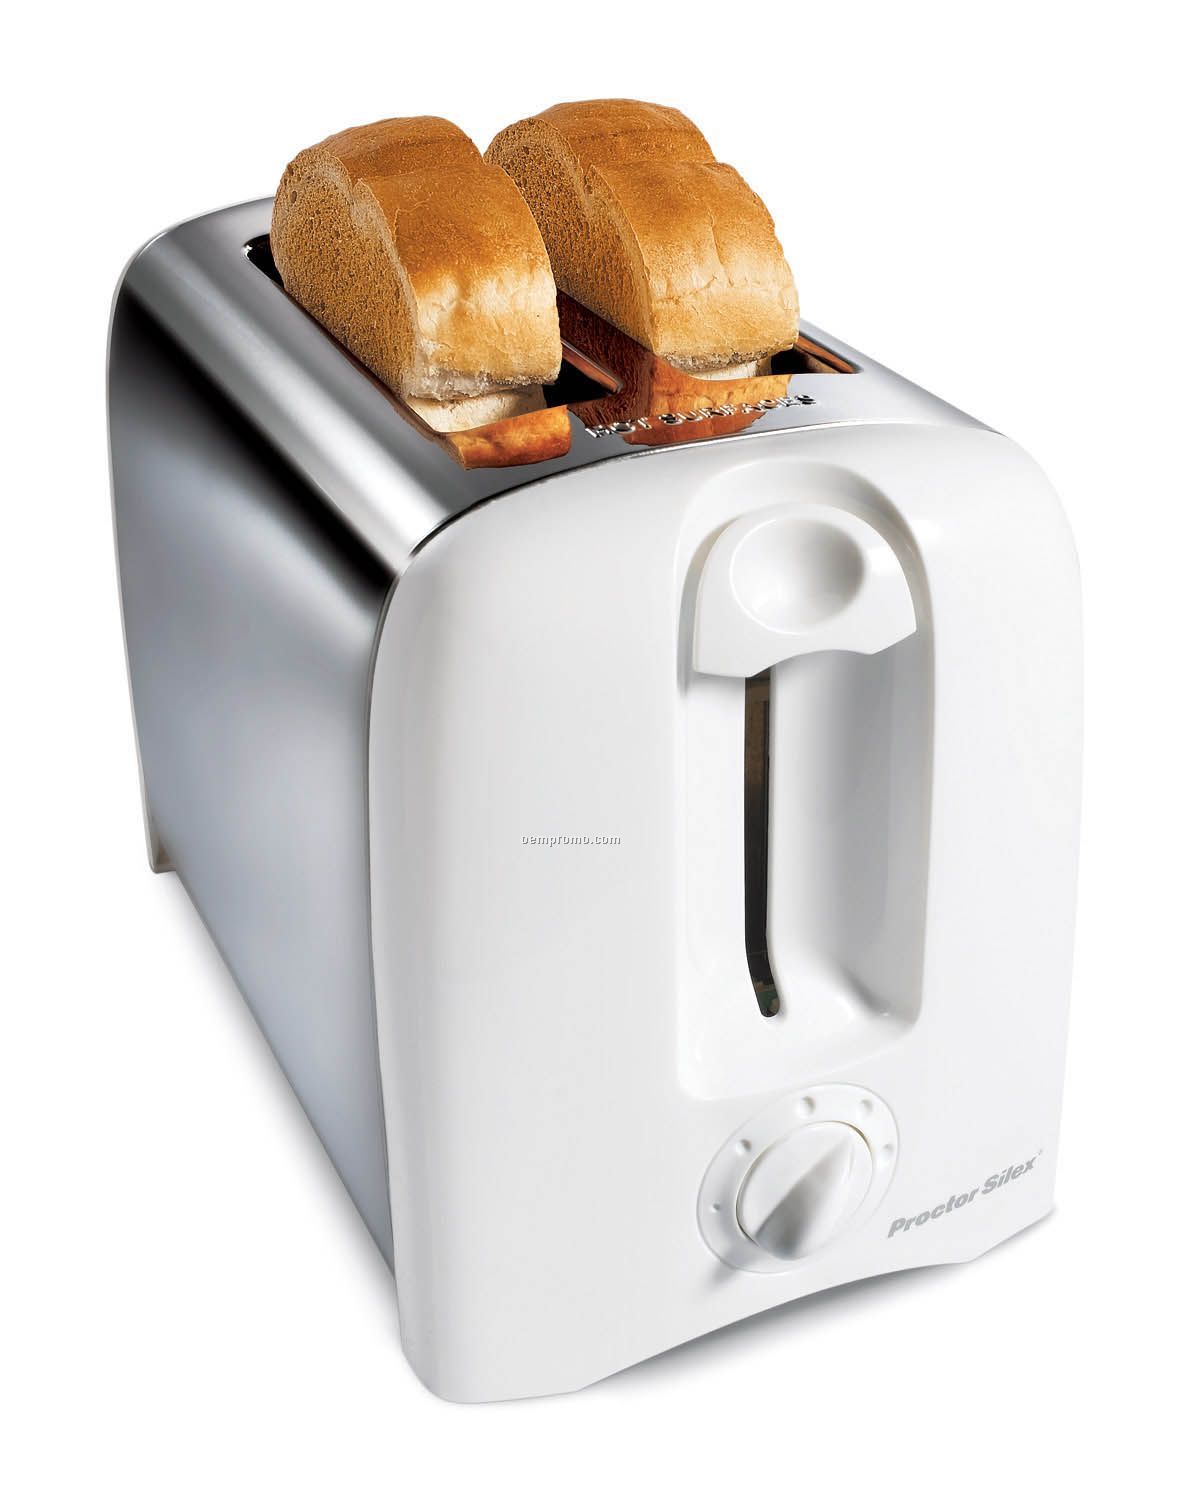 Proctor Silex Cool-wall Toaster